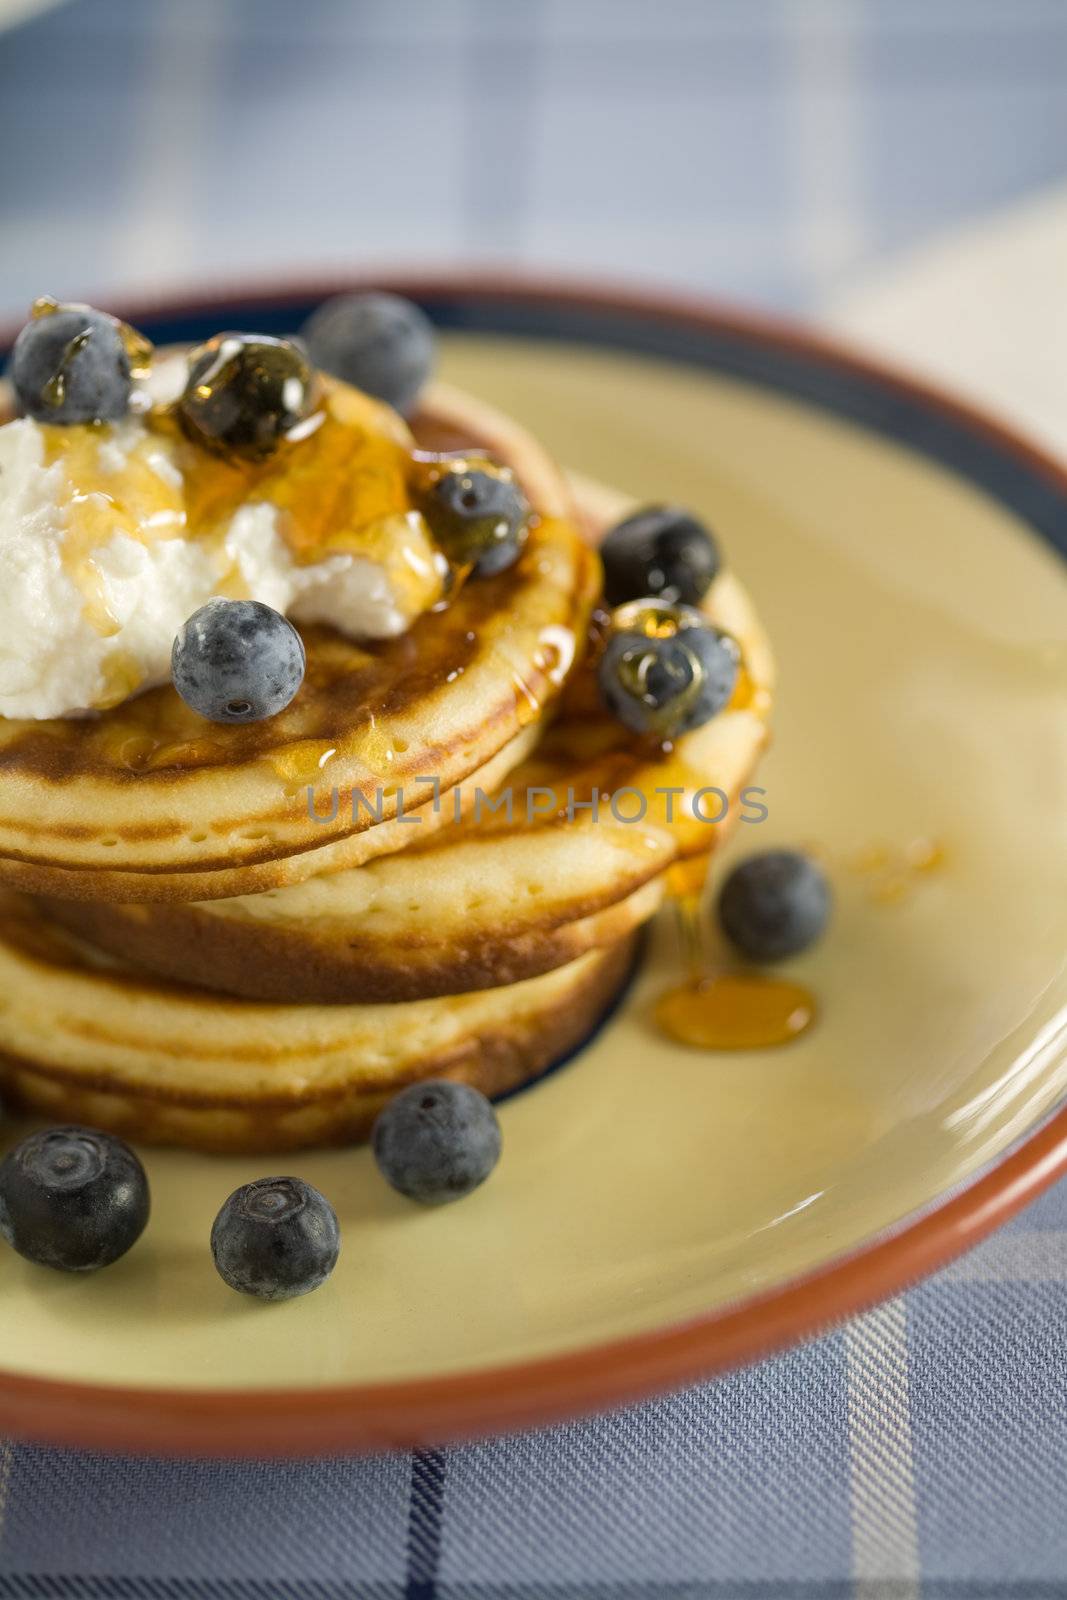 Blueberry pancakes by Fotosmurf